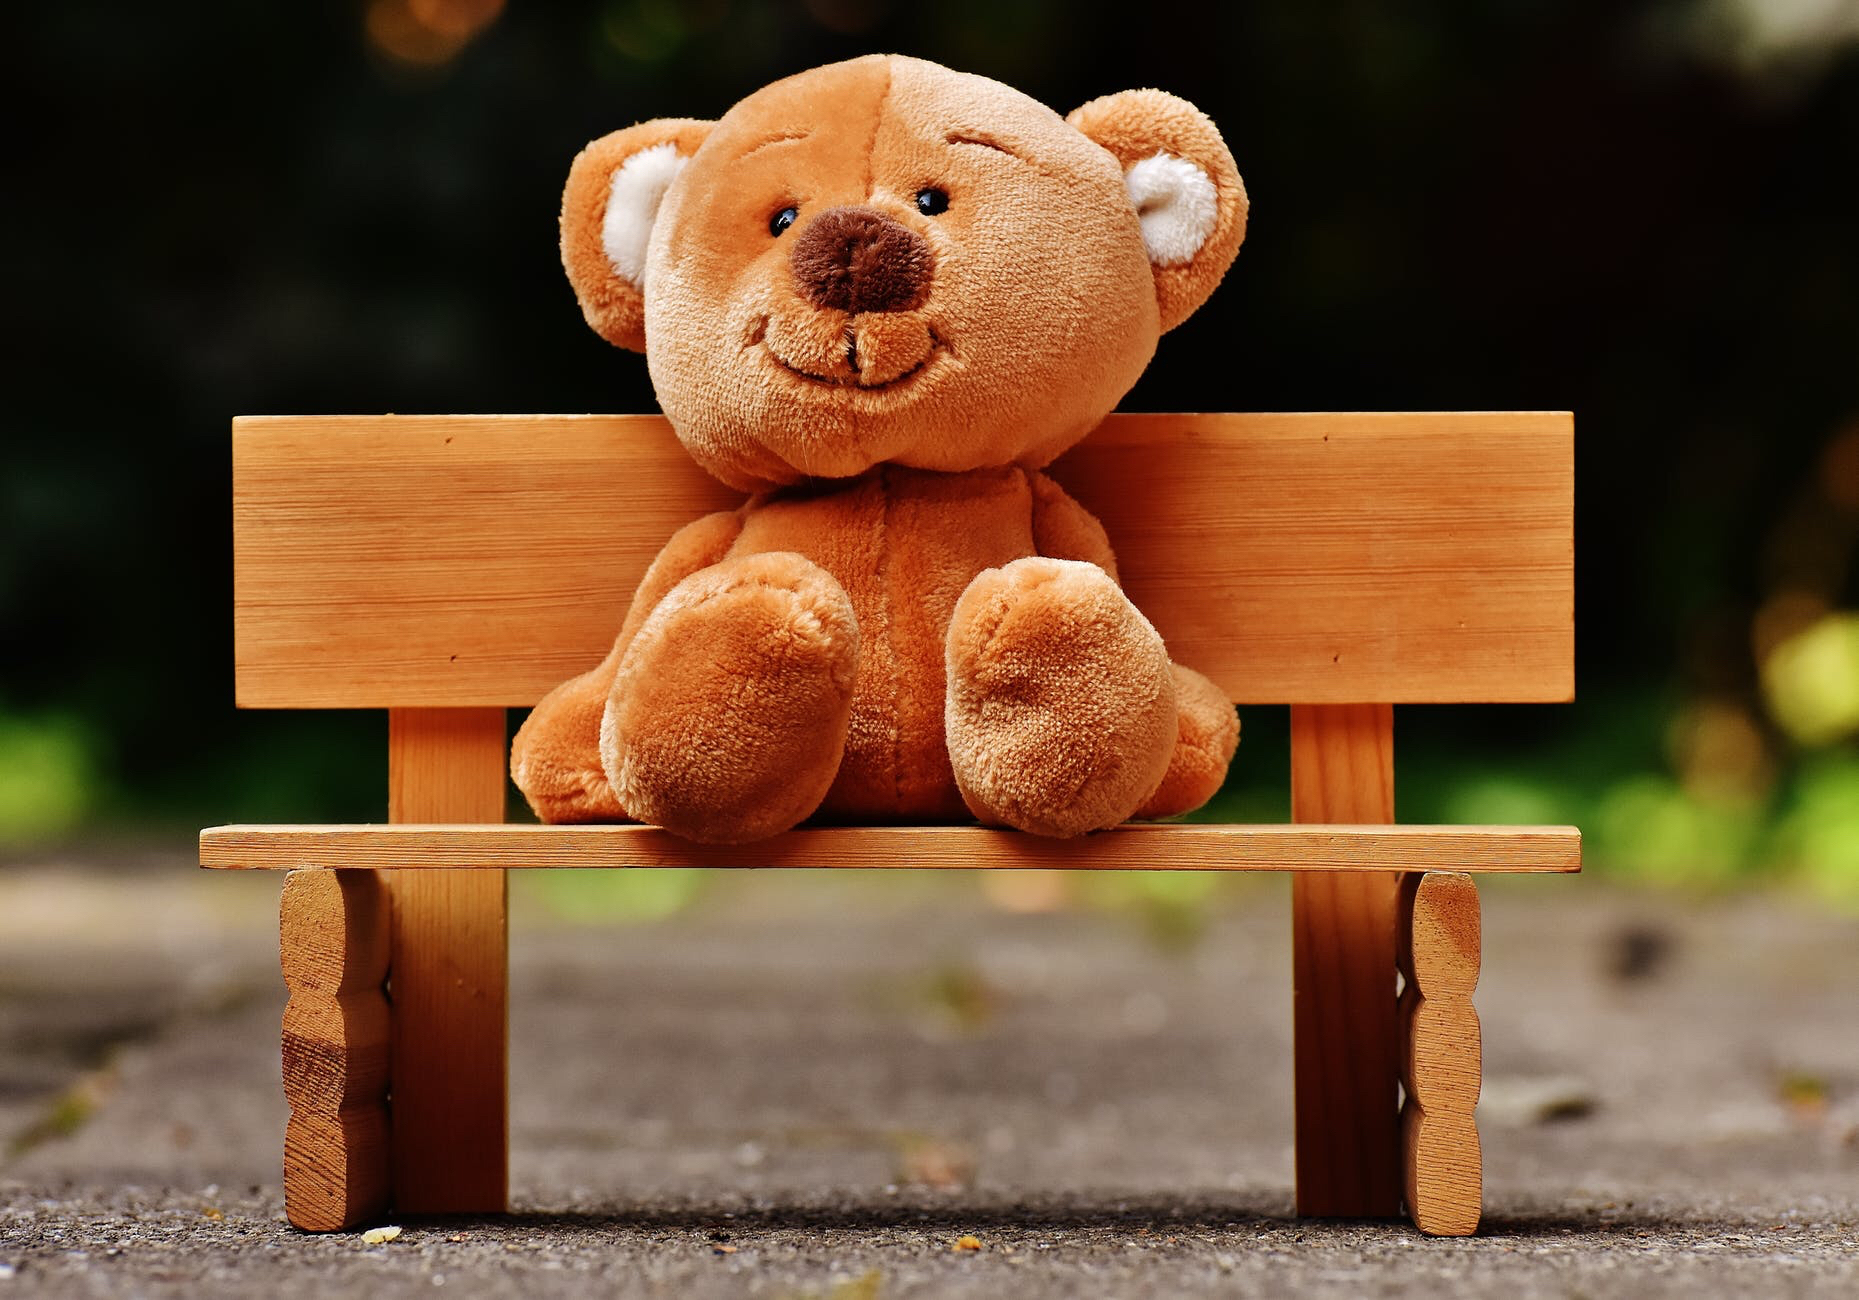 Teddy Bear Picnic Day - Time to get out your teddy bear and have a picnic with that cuddly. #TeddyBearPicnicDay